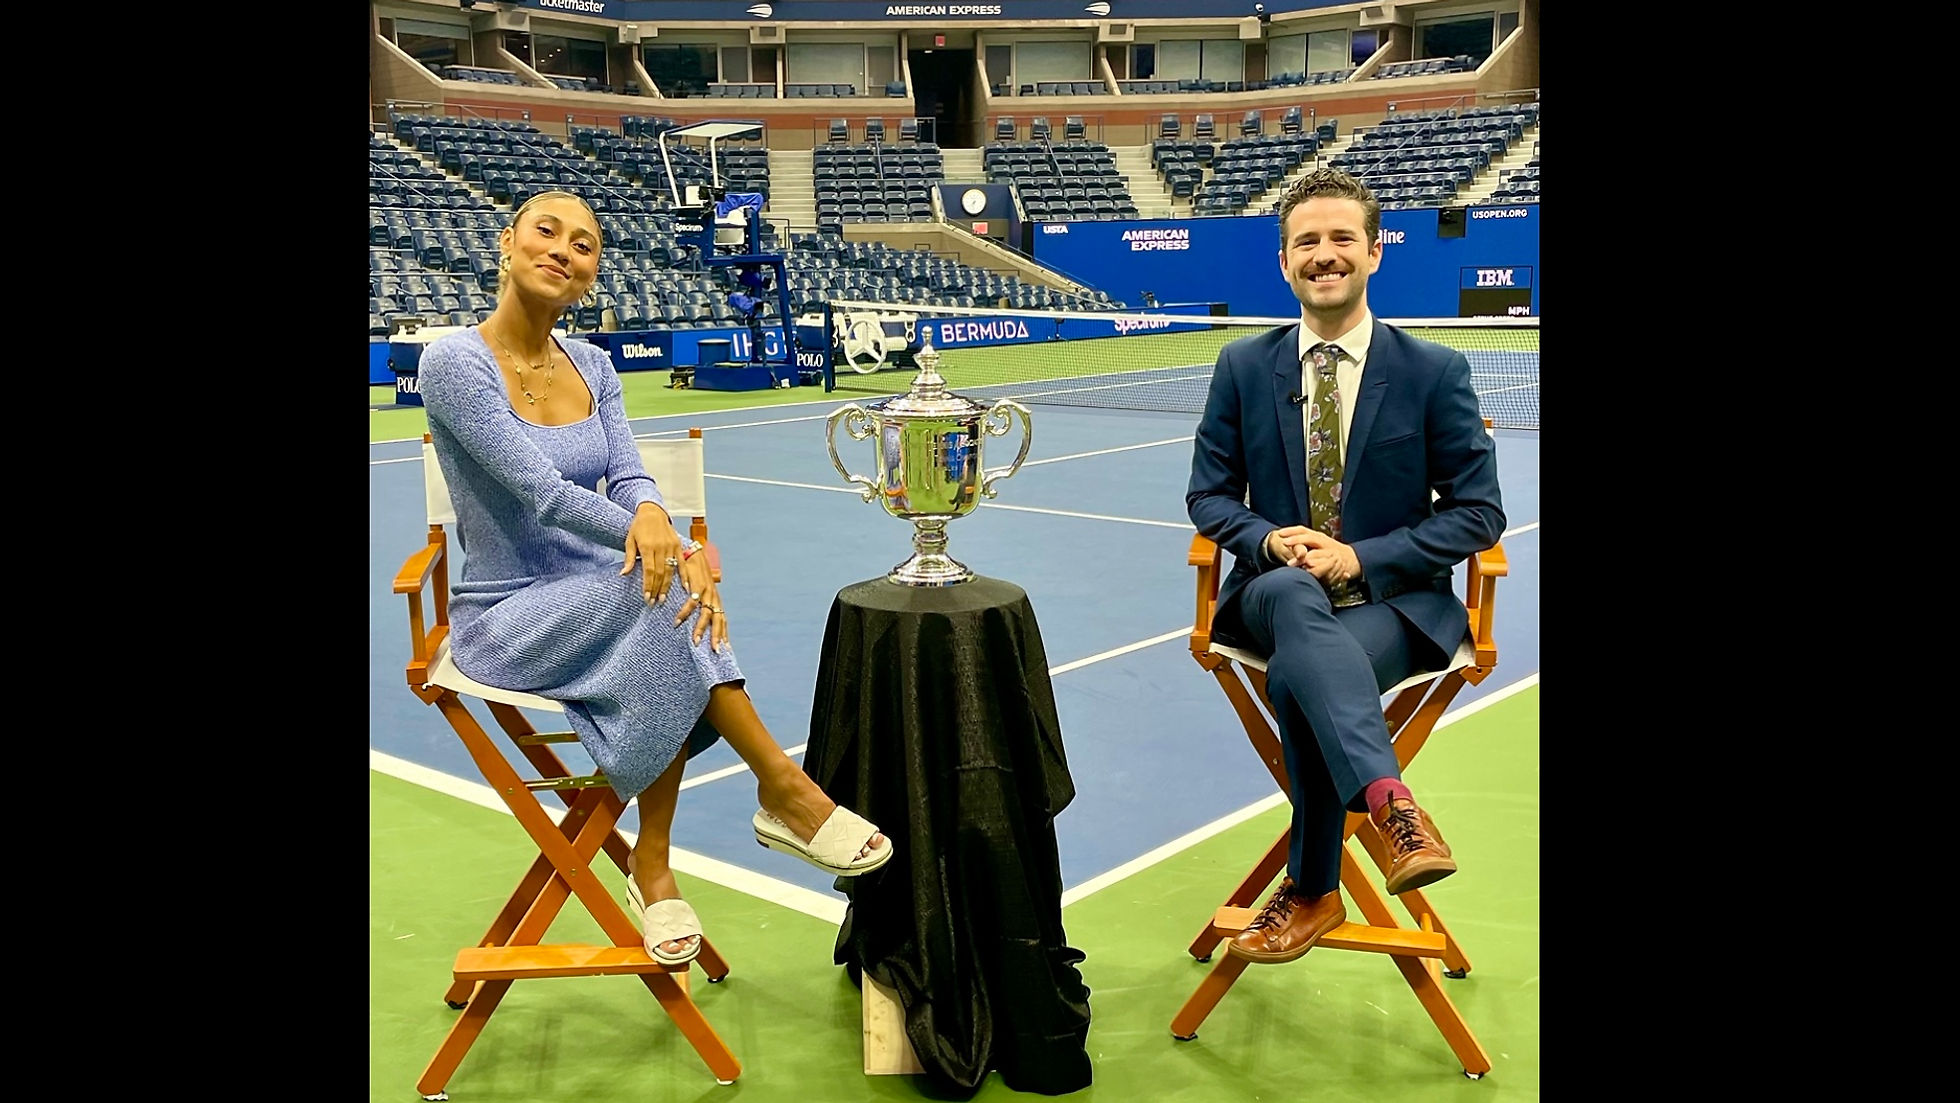 US OPEN 2021 | The Warm-Up: Day 14